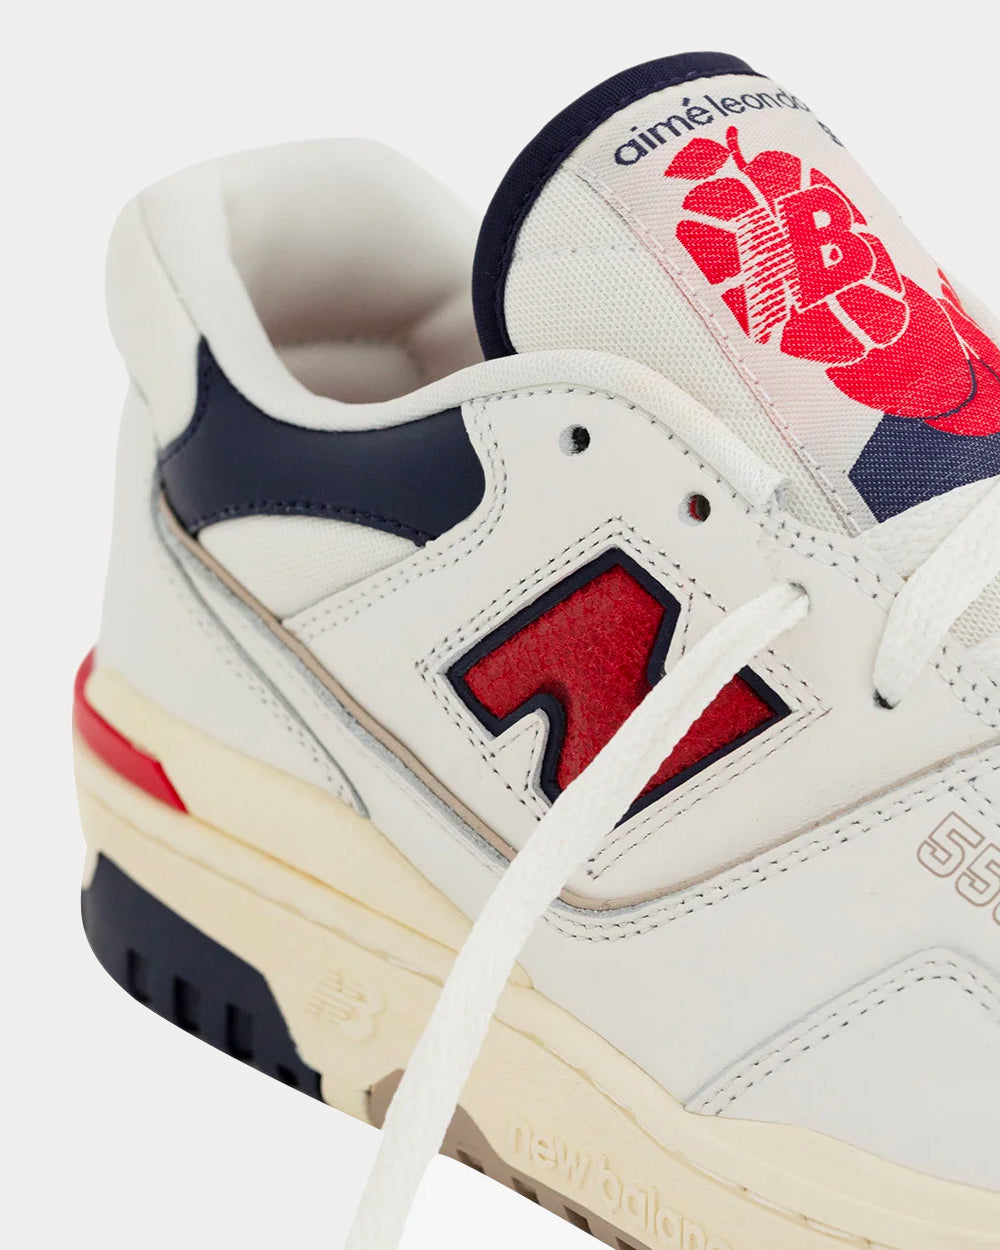 New Balance x Aime Leon Dore - 550 White / Red / Navy Low Top Sneakers